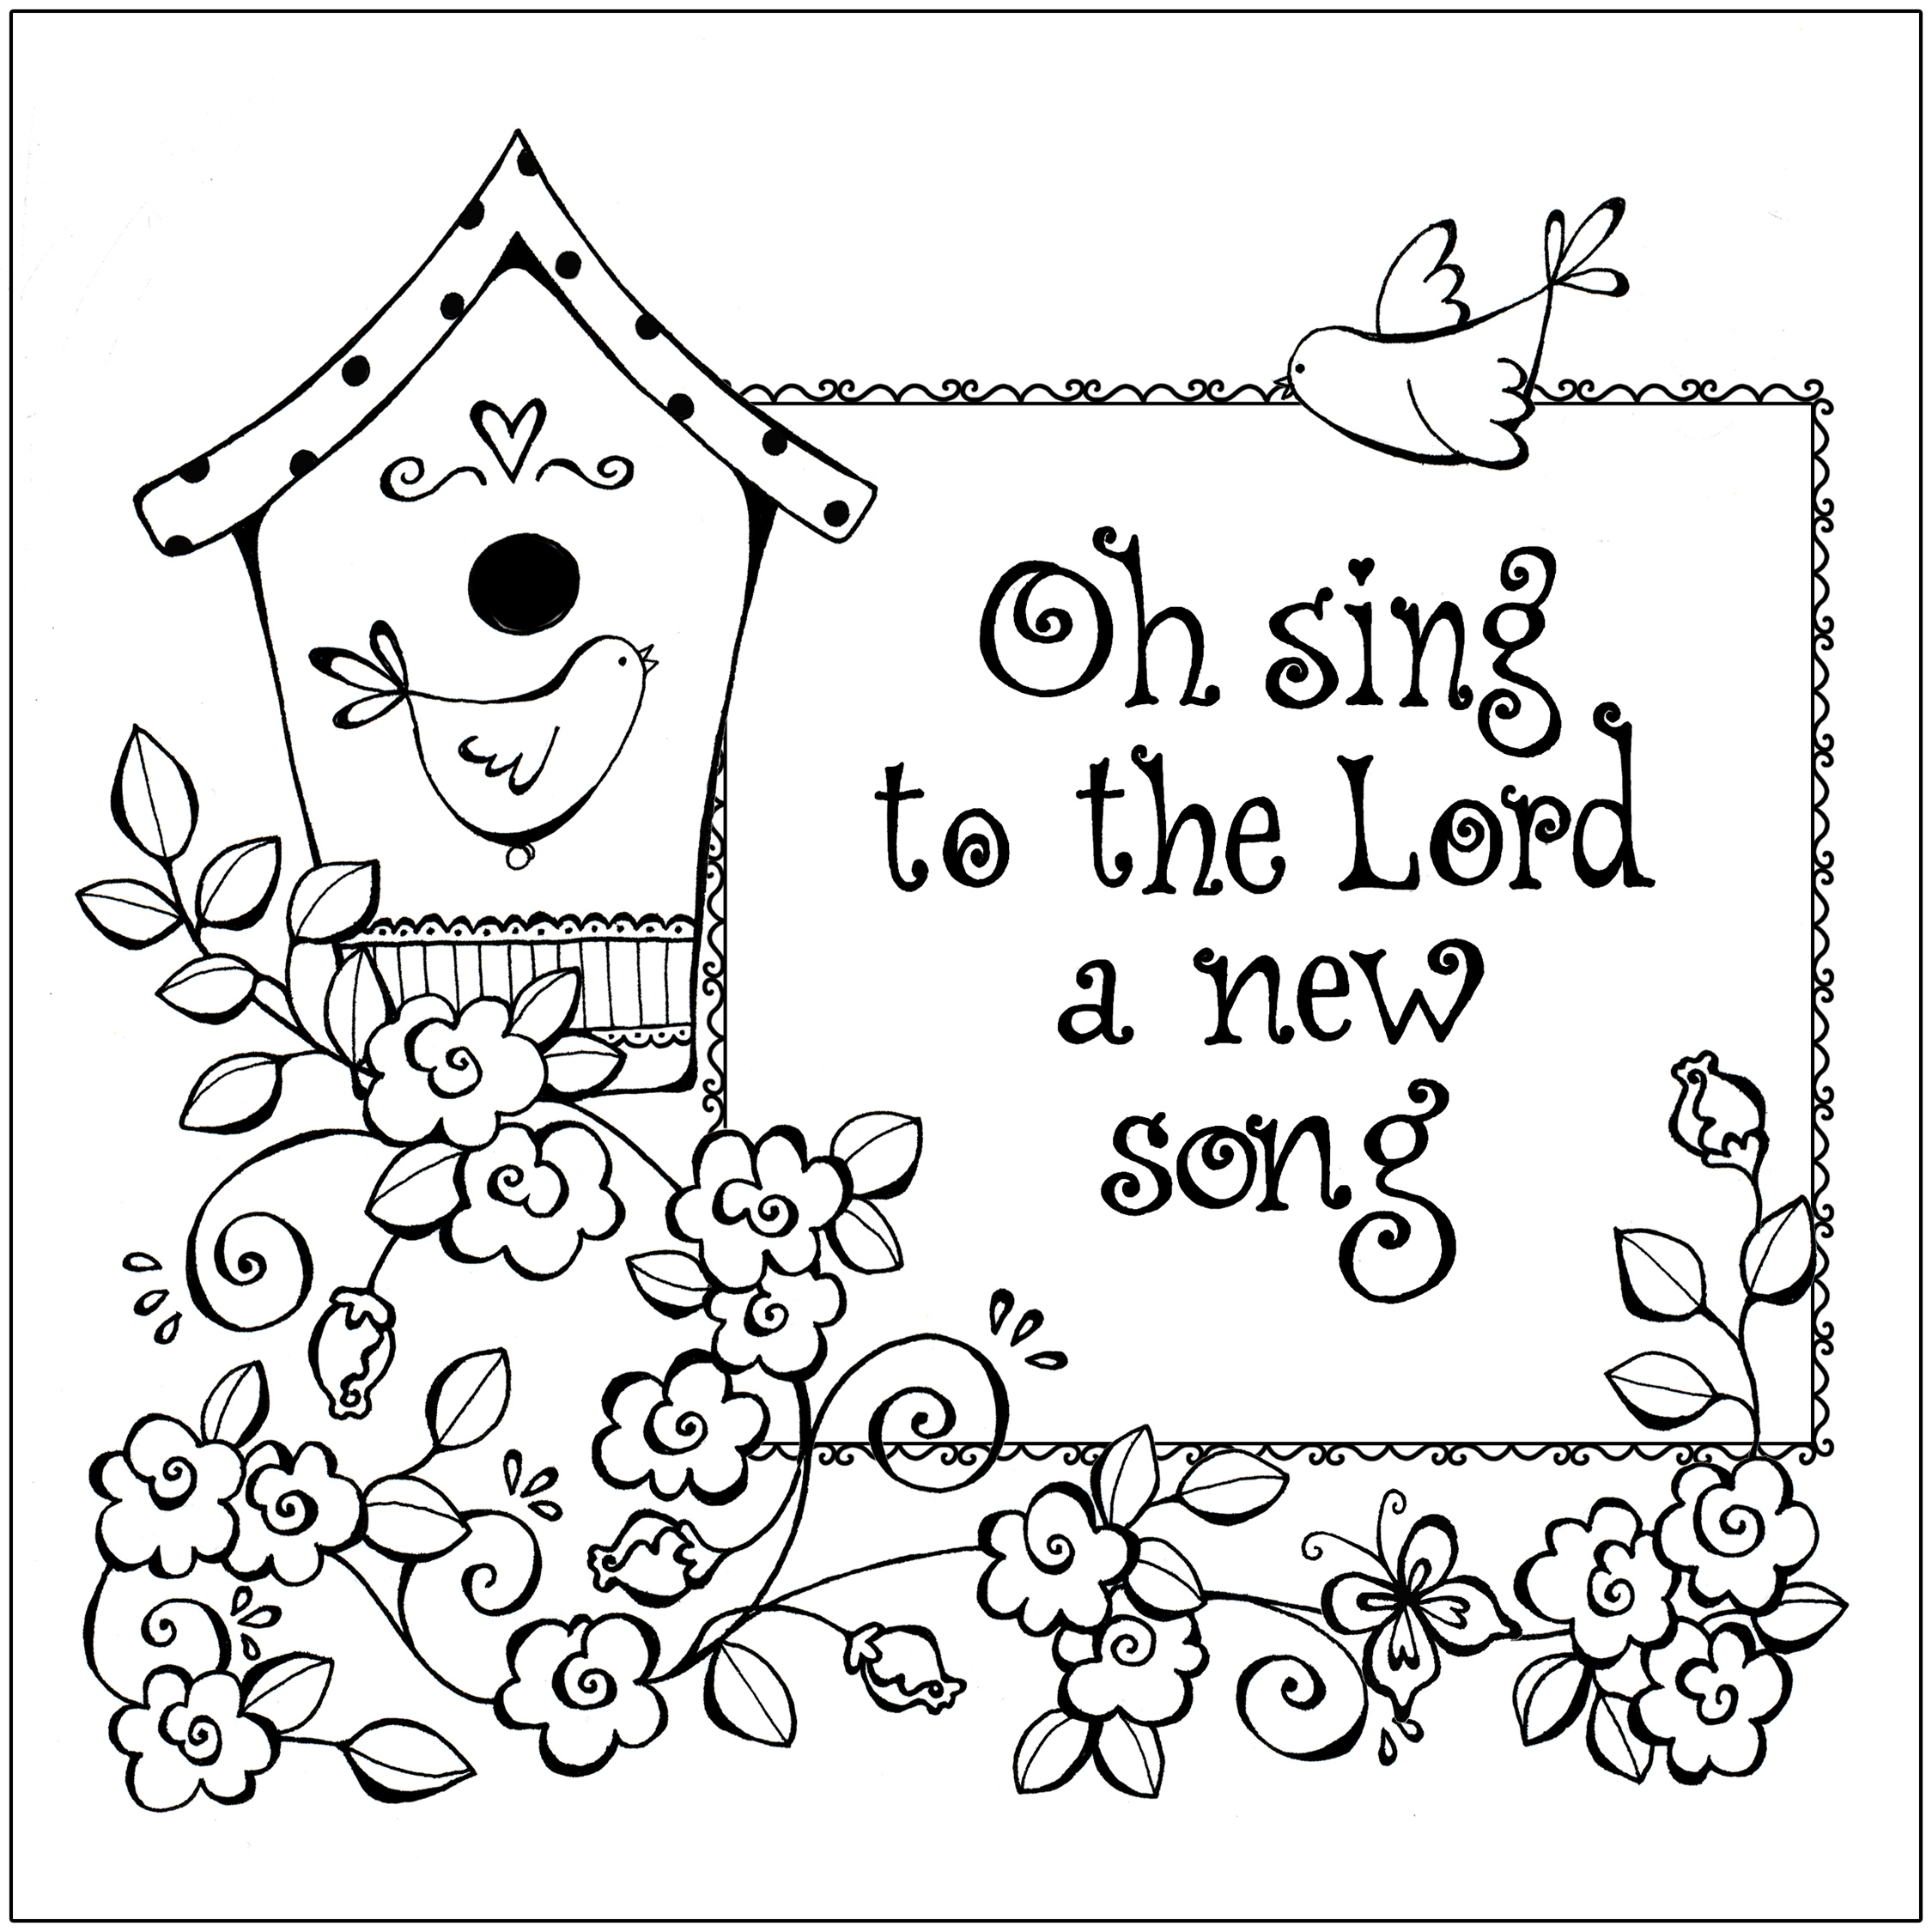 Download Free Printable Christian Coloring Pages For Kids Best Coloring Pages For Kids